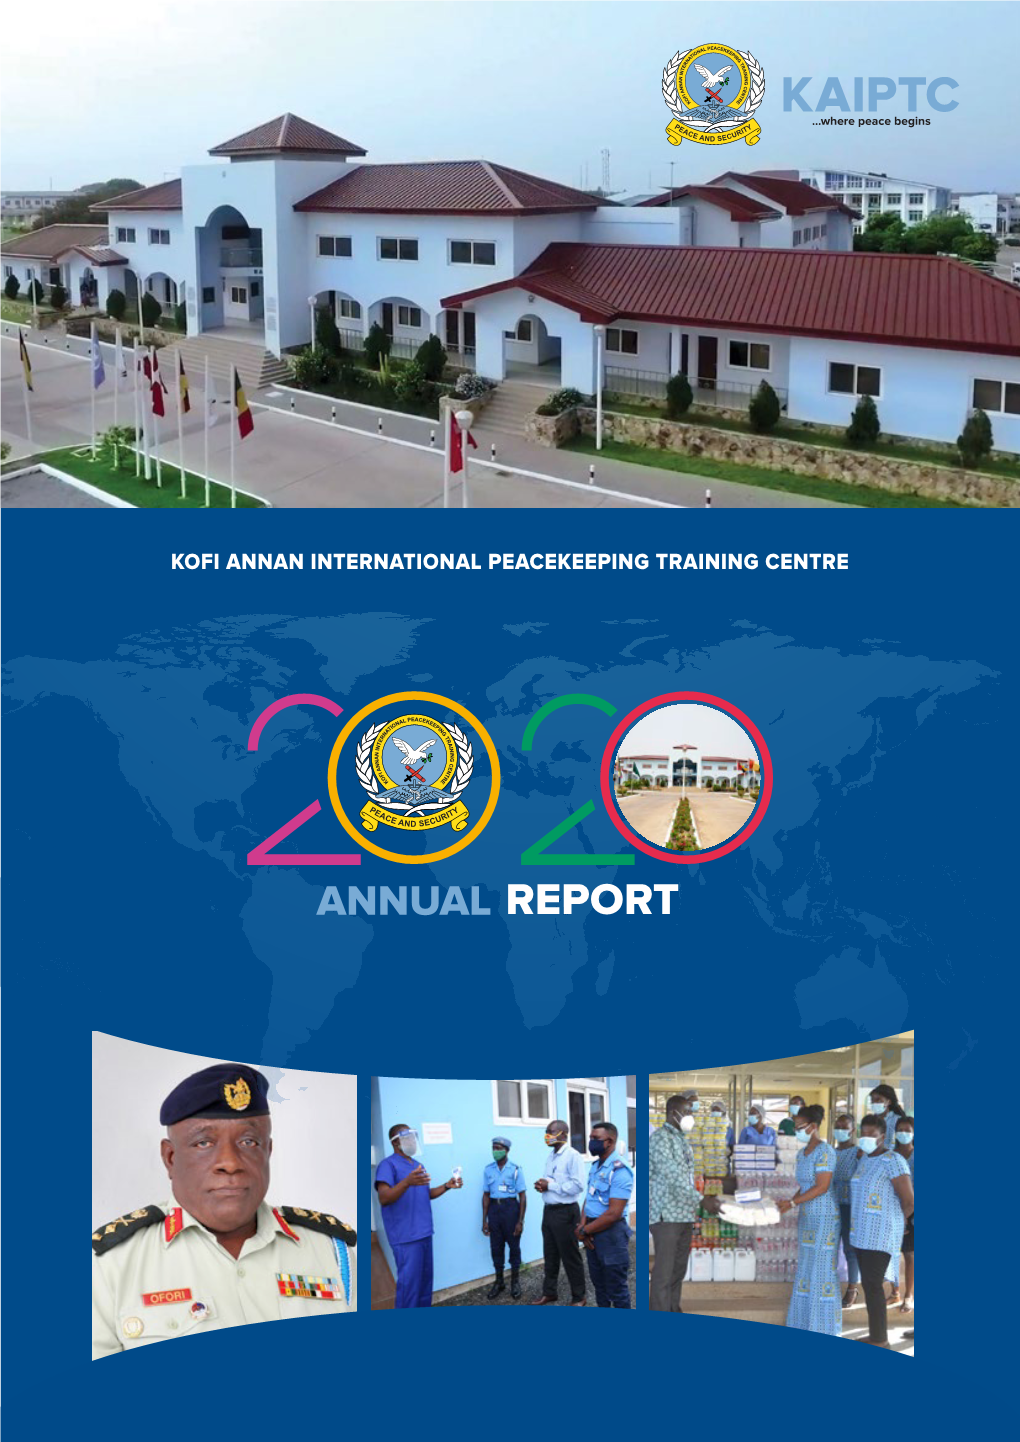 Download 2020 Annual Report